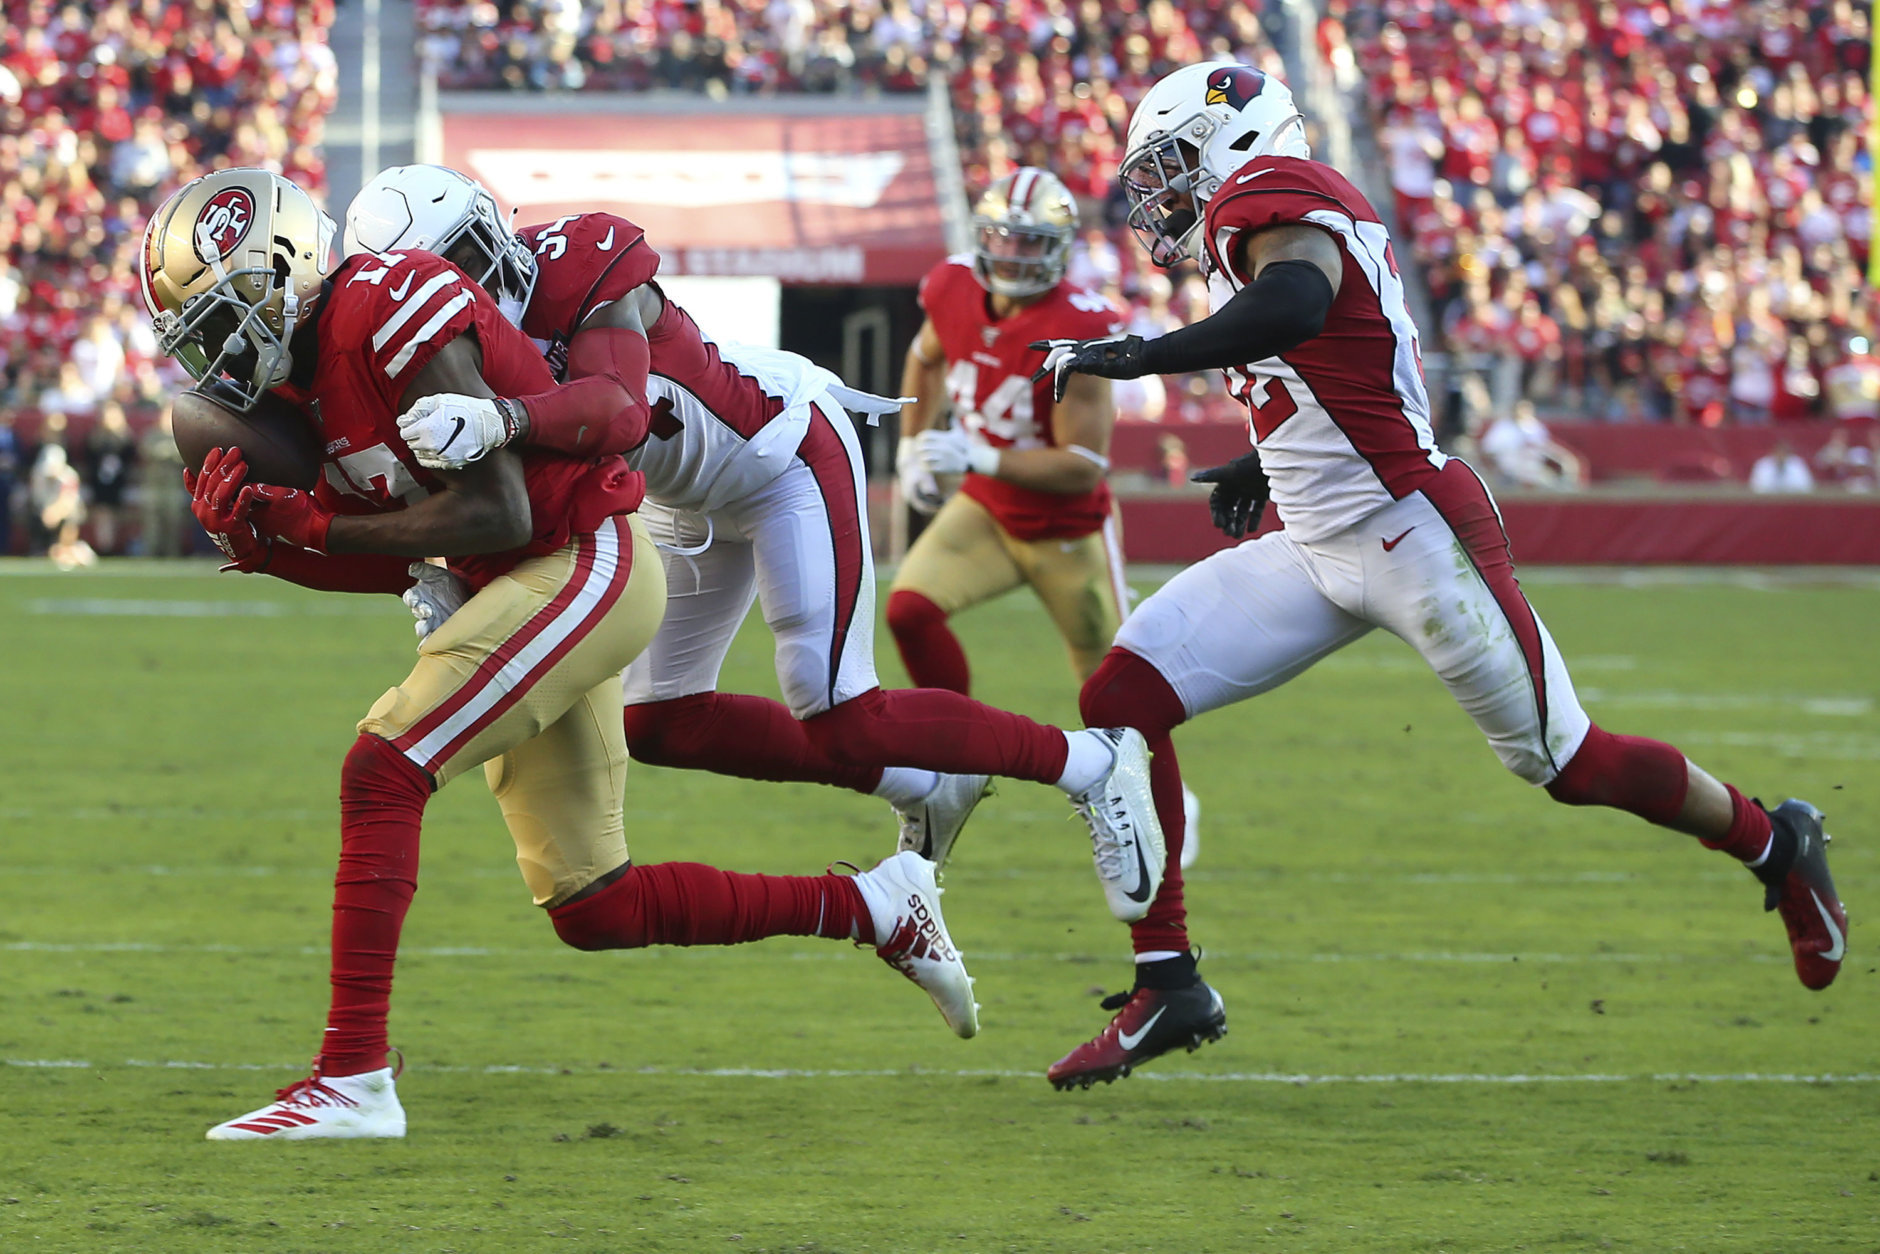 <p><b><i>Cardinals 26</i></b><br />
<b><i>49ers 36</i></b></p>
<p>Kyler Murray had a fast start and <a href="https://profootballtalk.nbcsports.com/2019/11/11/chandler-jones-has-a-chance-to-lead-league-in-sacks-and-forced-fumbles/" target="_blank" rel="noopener">Chandler Jones kept up his torrid pace, </a>but Arizona&#8217;s so bad <a href="https://www.espn.com/chalk/story/_/id/28104832/last-second-49ers-td-worst-case-scenario-caesars-some-cardinals-bettors" target="_blank" rel="noopener">they can&#8217;t even lose right</a>.</p>
<p>But give it up for Jimmy G. He needed to prove he can carry San Fran when necessary, and his first 400-yard, 4-TD game certainly demonstrated that.</p>
